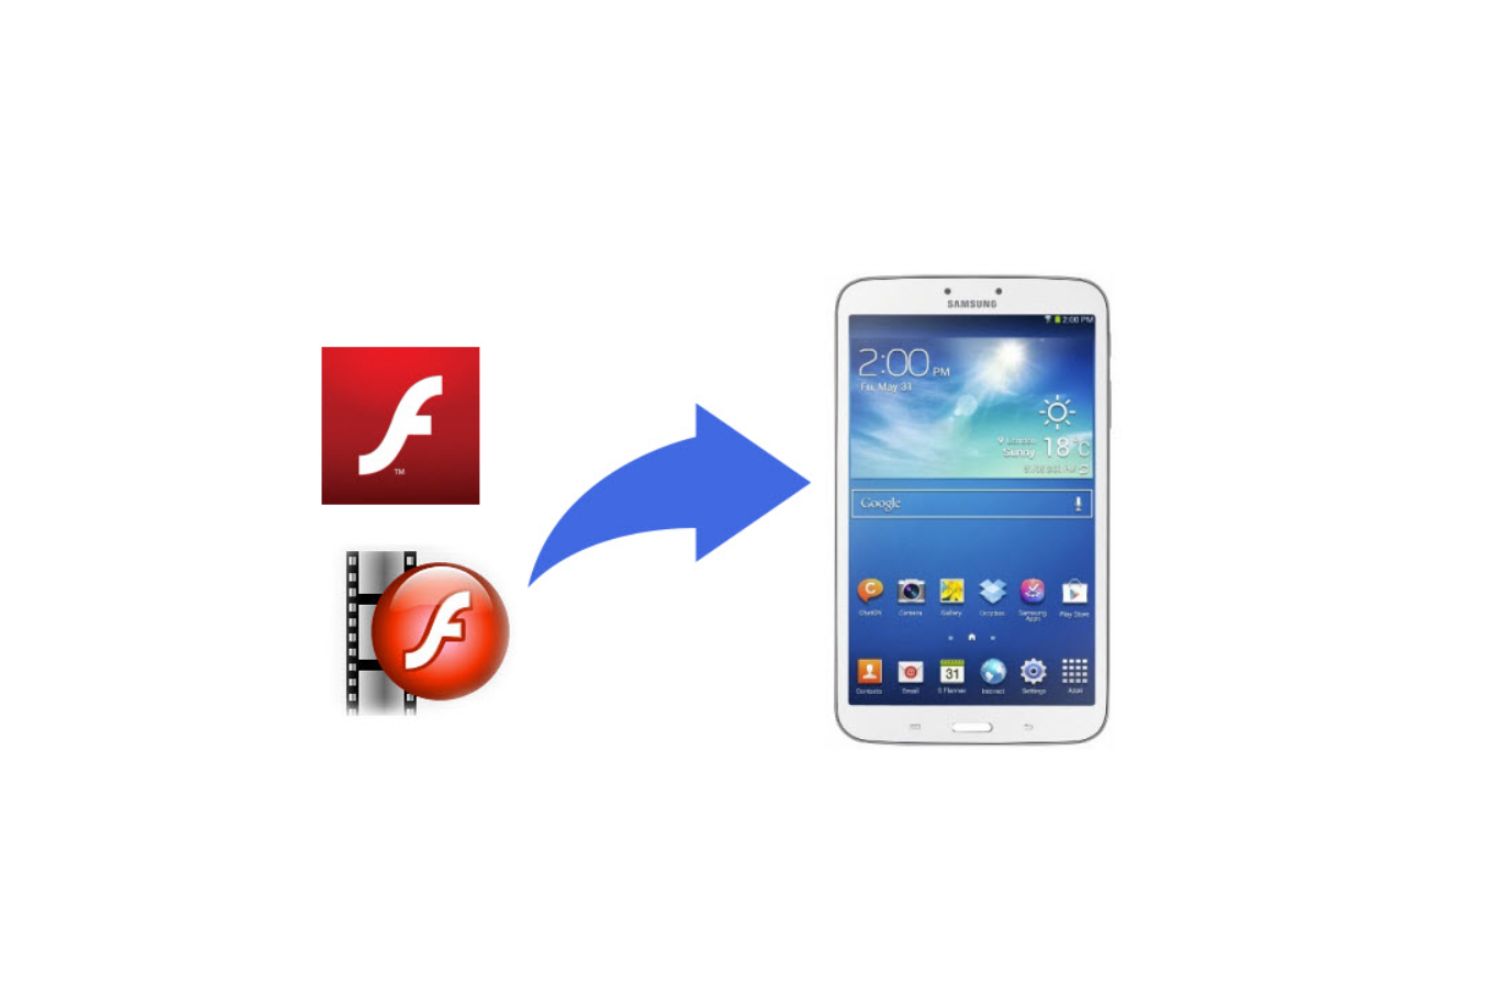 How To Install Adobe Flash Player On Samsung Tablet